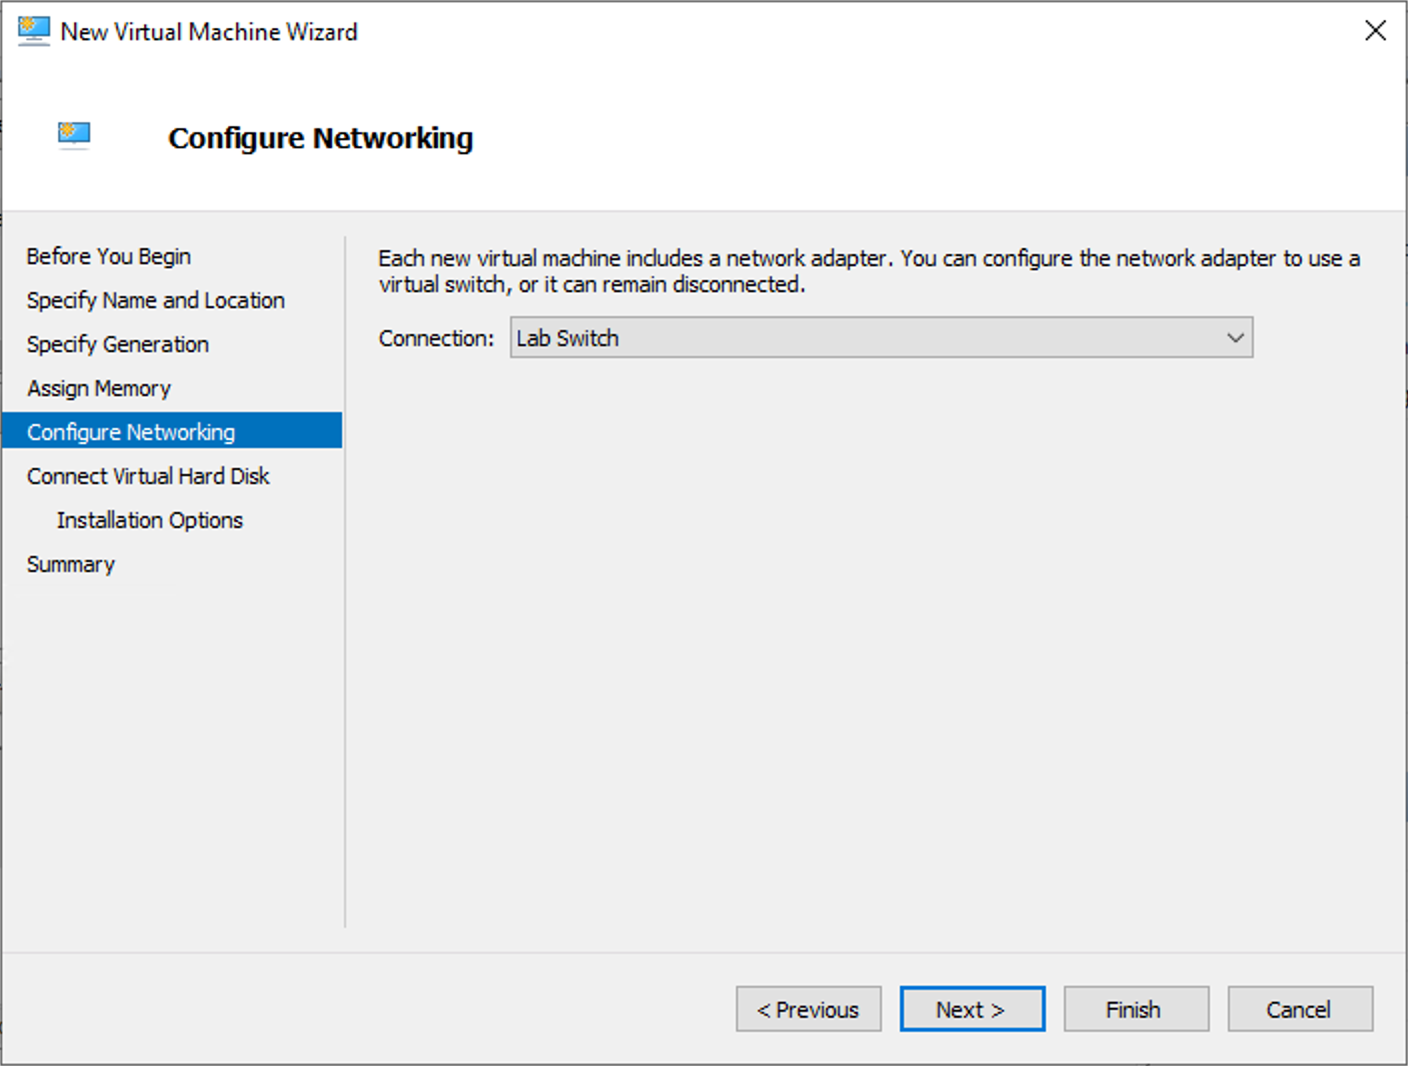 Specify the network connection for the included network adapter, or this can be done later